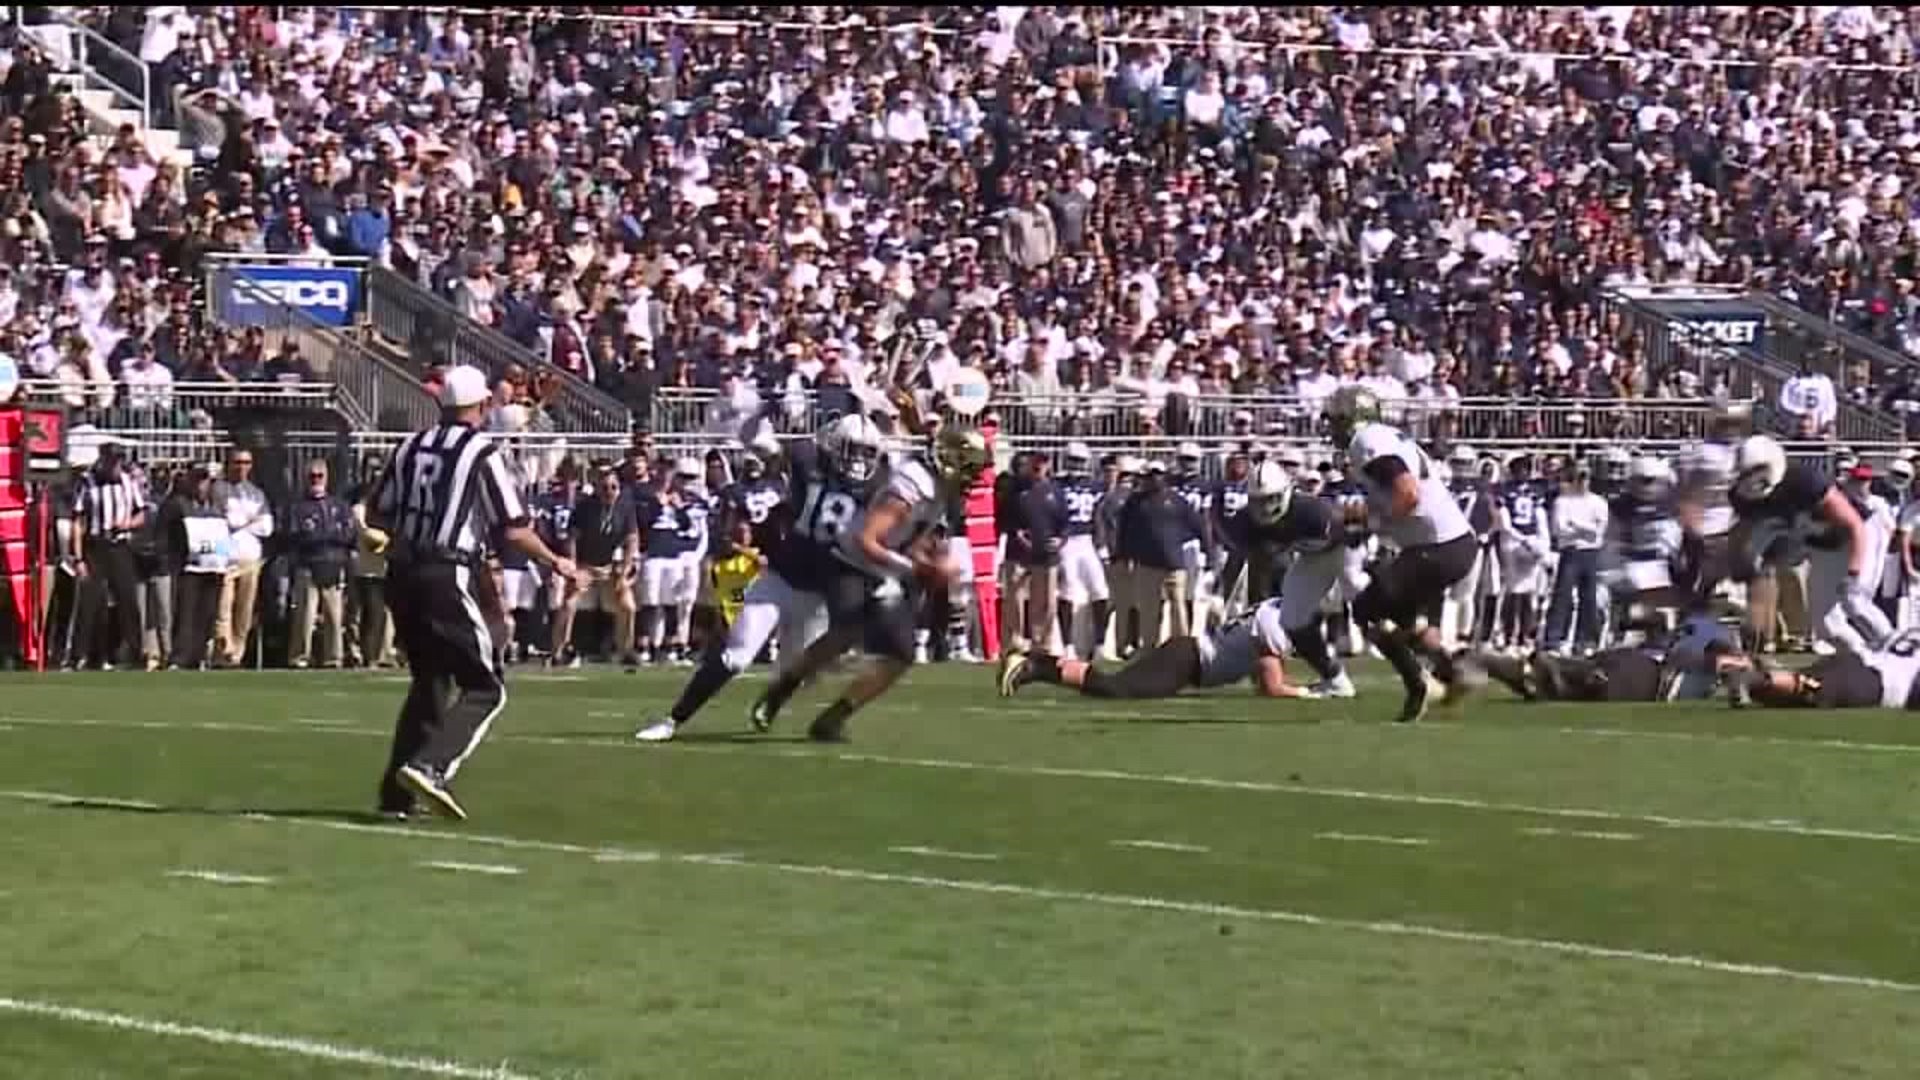 #12 Penn State Defeats Purdue 35-7 And Moves To (5-0)